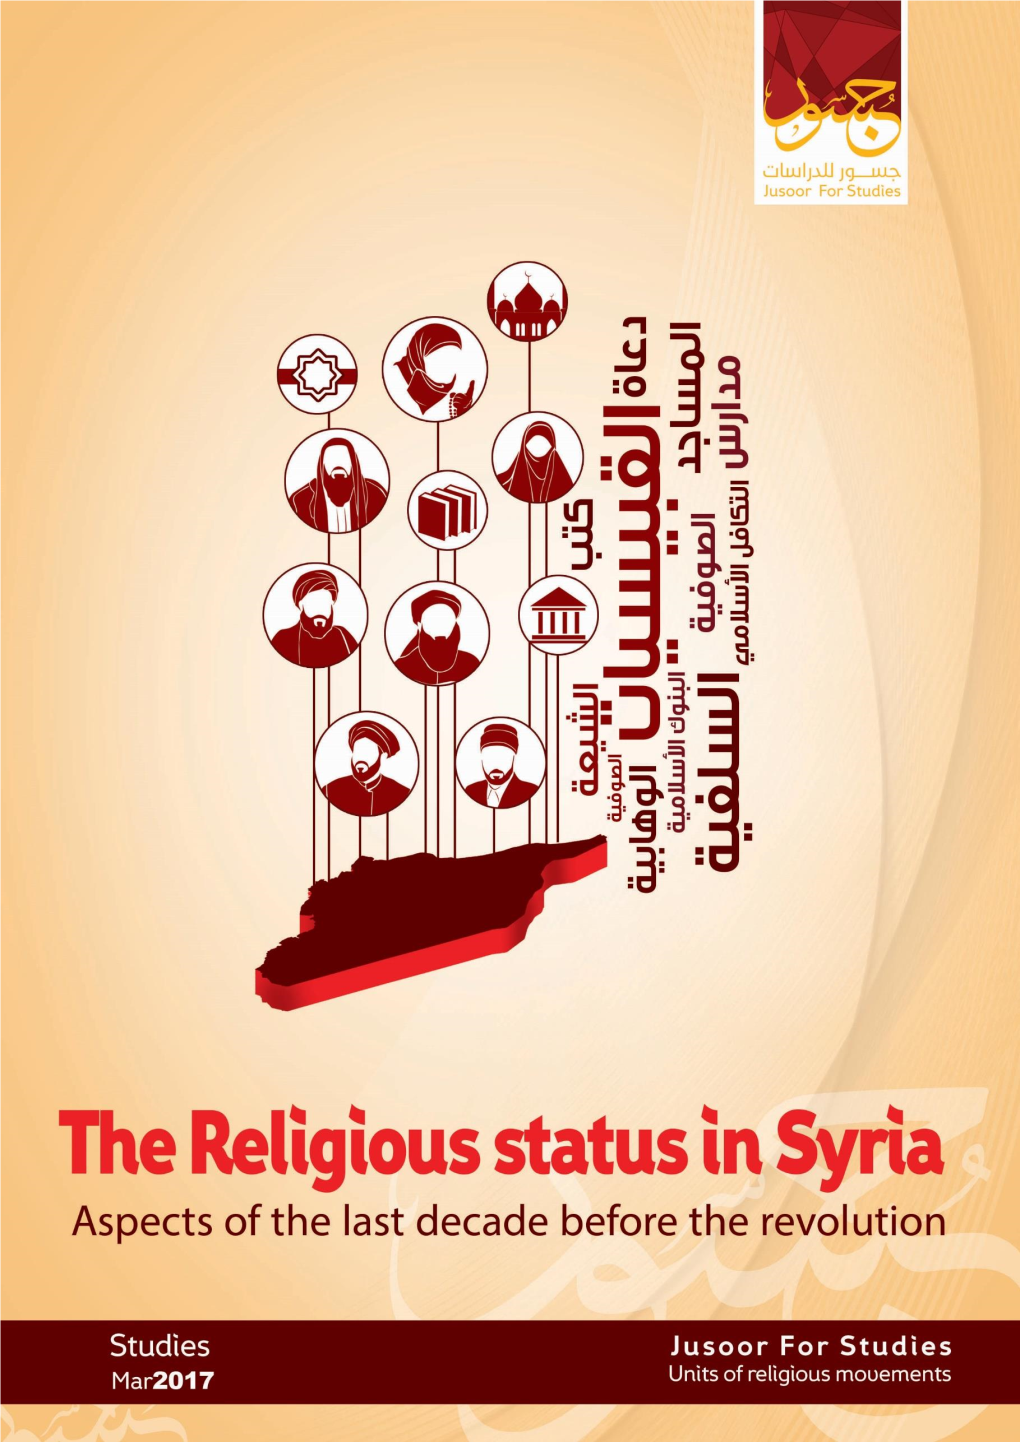 Study the Religious Status in Syria Aspects of the Last Decade Before